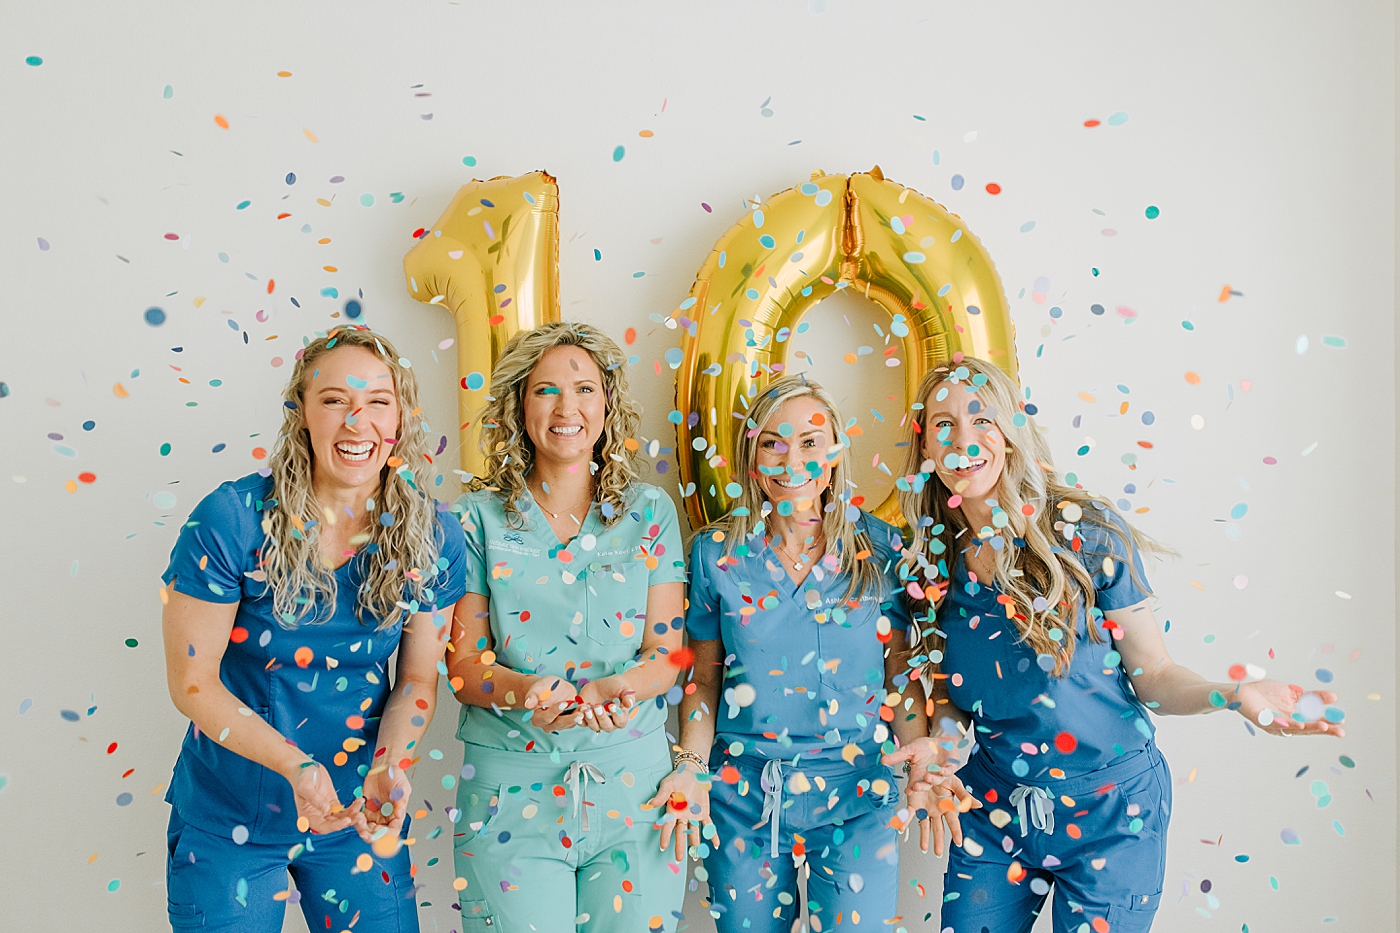 midstate skin providers throwing confetti with 10 balloons